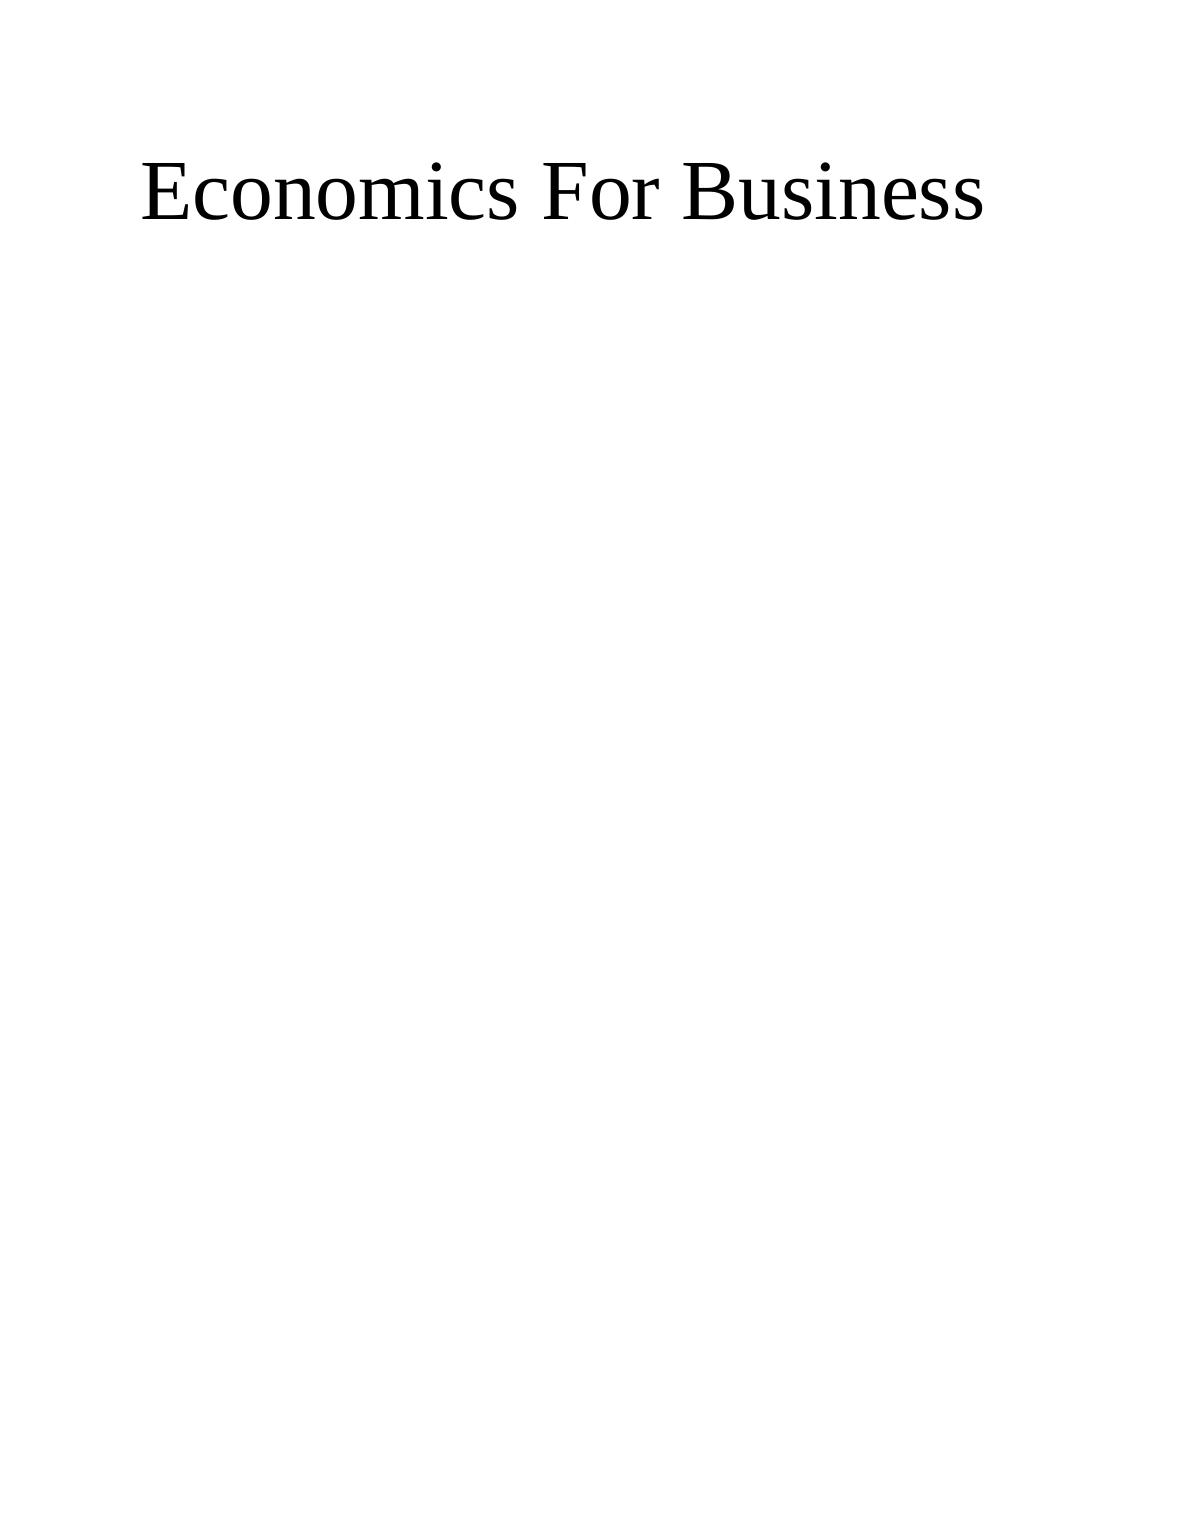 Economics For a Business Assignment - Polo Mint_1